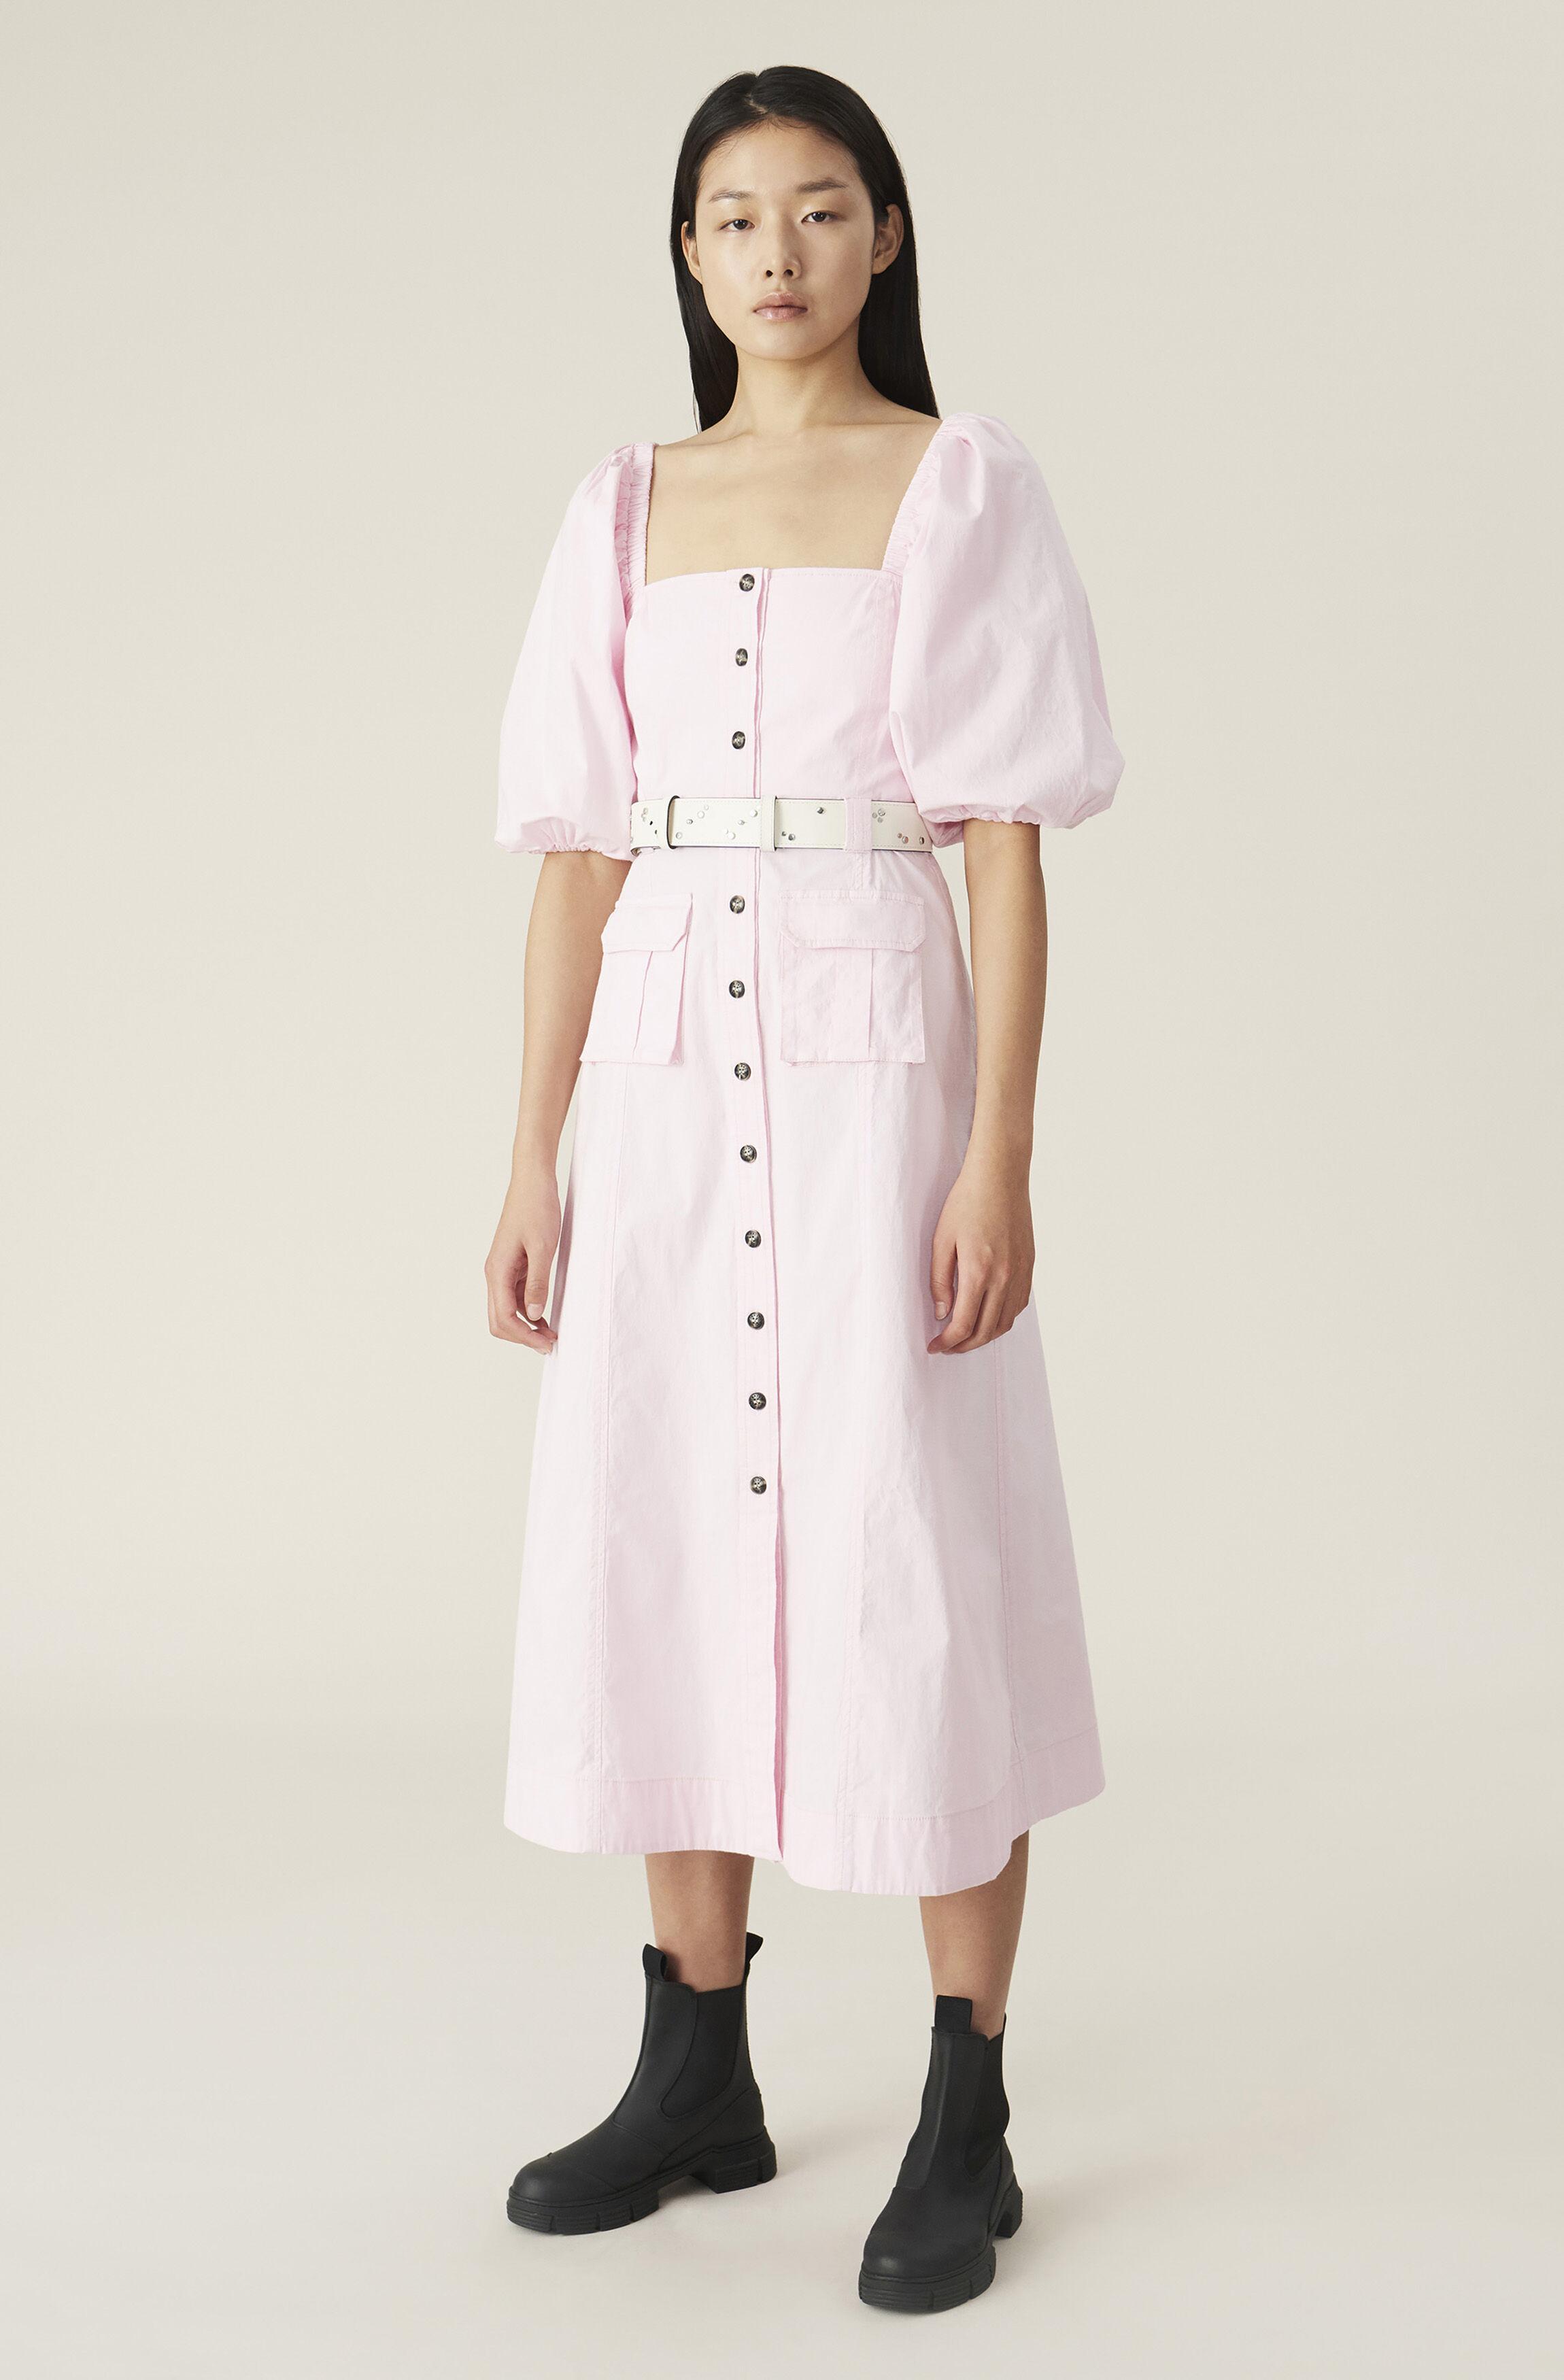 Ganni Ripstop Cotton Chino Puff Sleeve Dress in Cherry Blossom (Pink) - Lyst